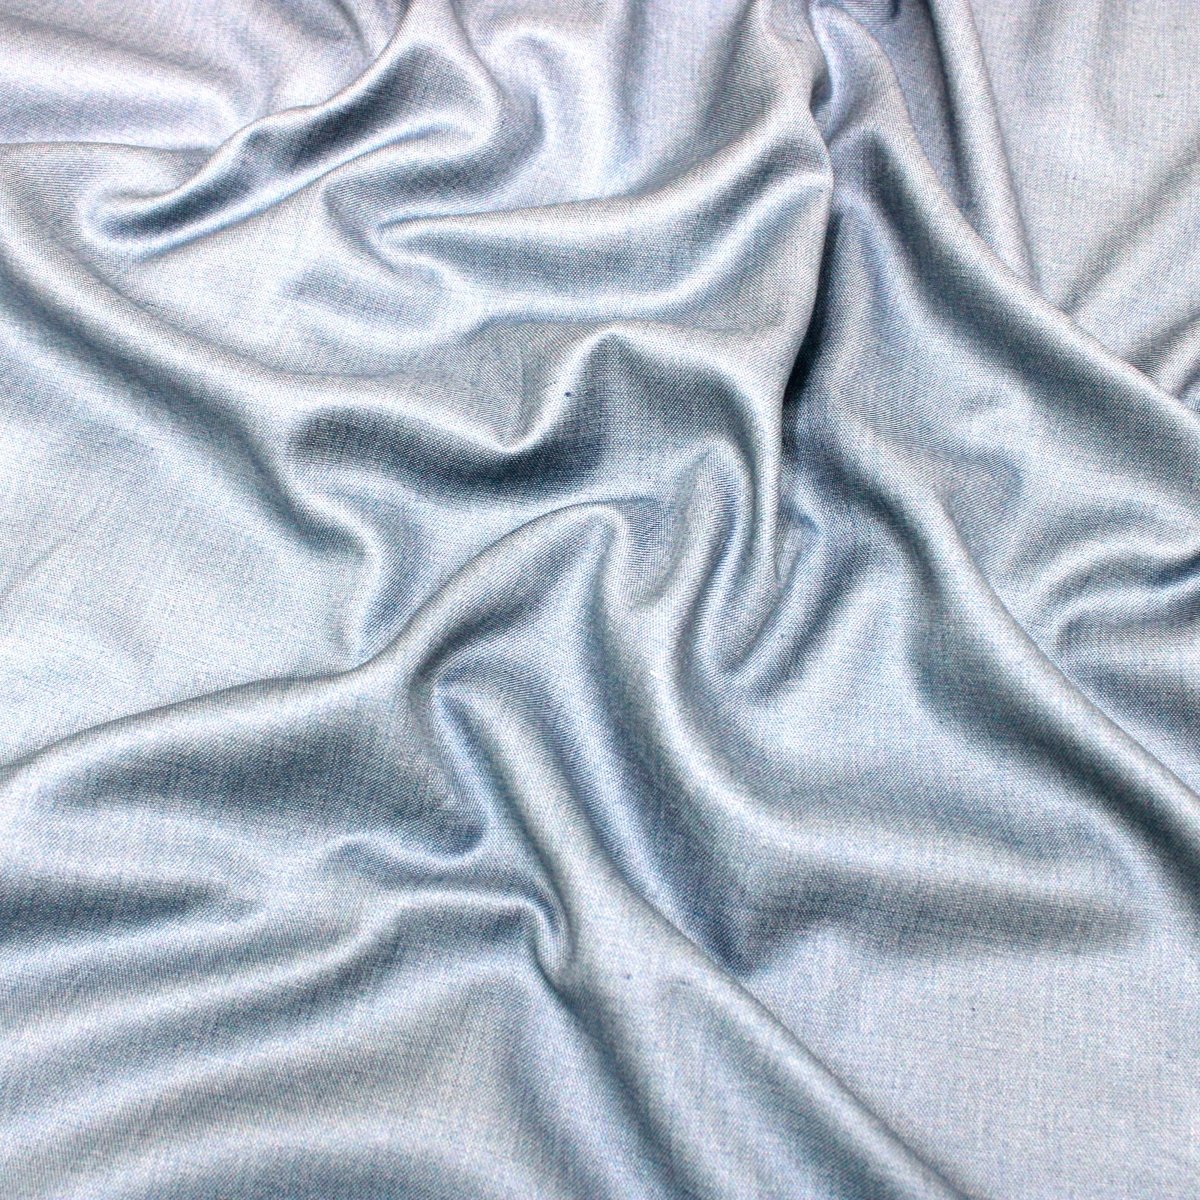 3 Metres Premium Quality Viscose Blend Suiting Fabric 55" Wide Washed Blue - Pound A Metre